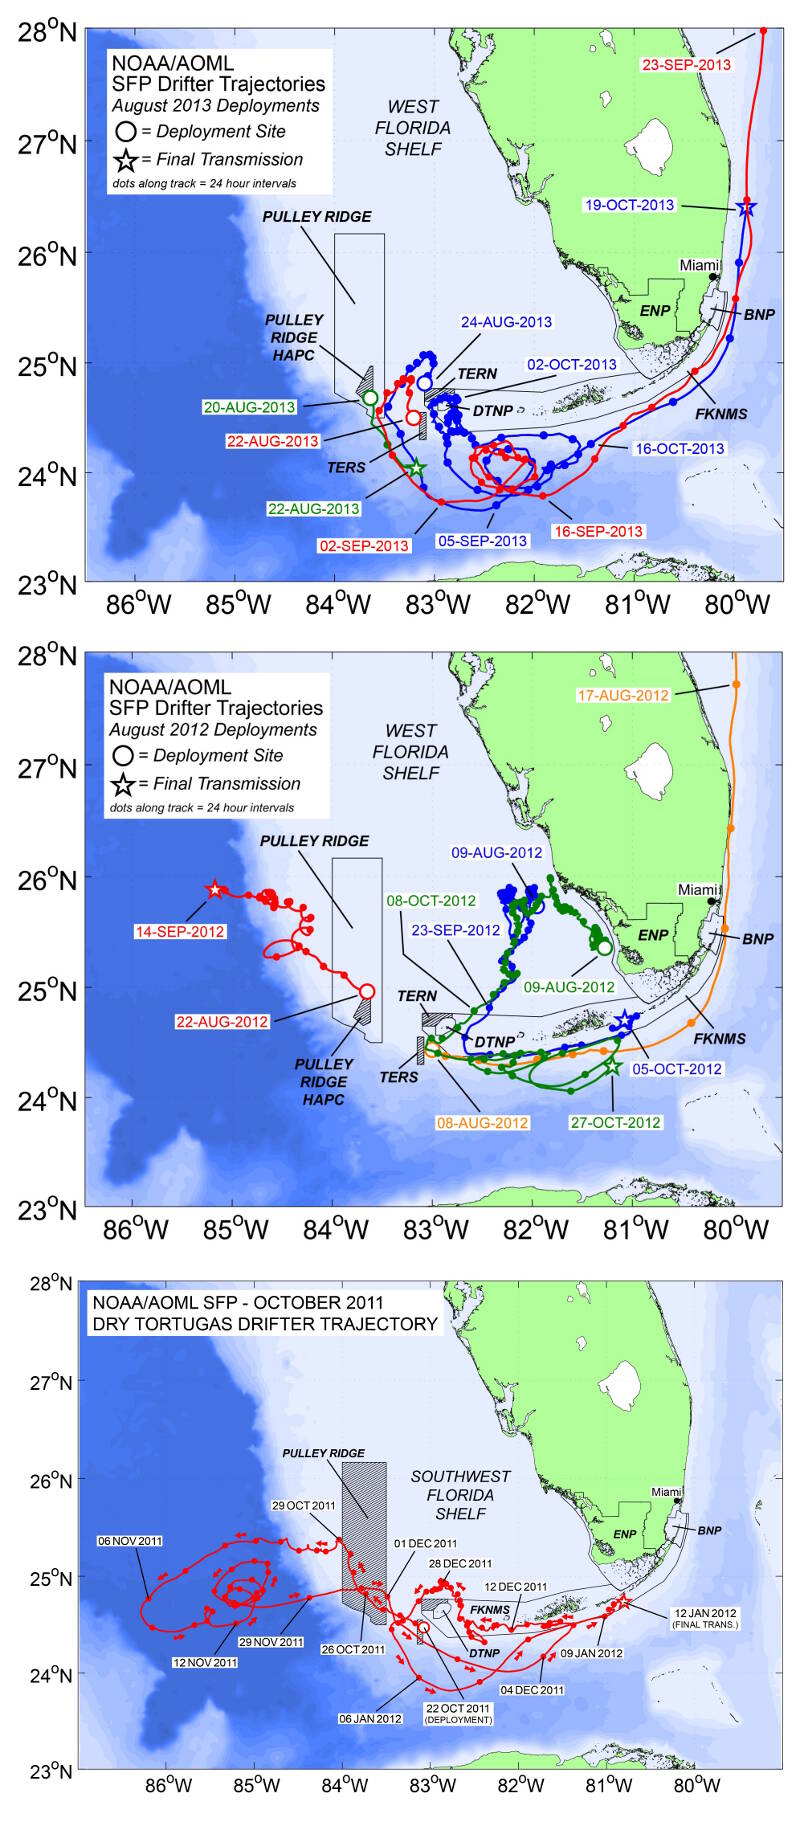 Figure 3. Shows trajectories from surface drifters deployed around the region in 2011, 2012, and 2013. These tracks exemplify the highly variable circulation pathways that affect south Florida’s coastal marine ecosystems.